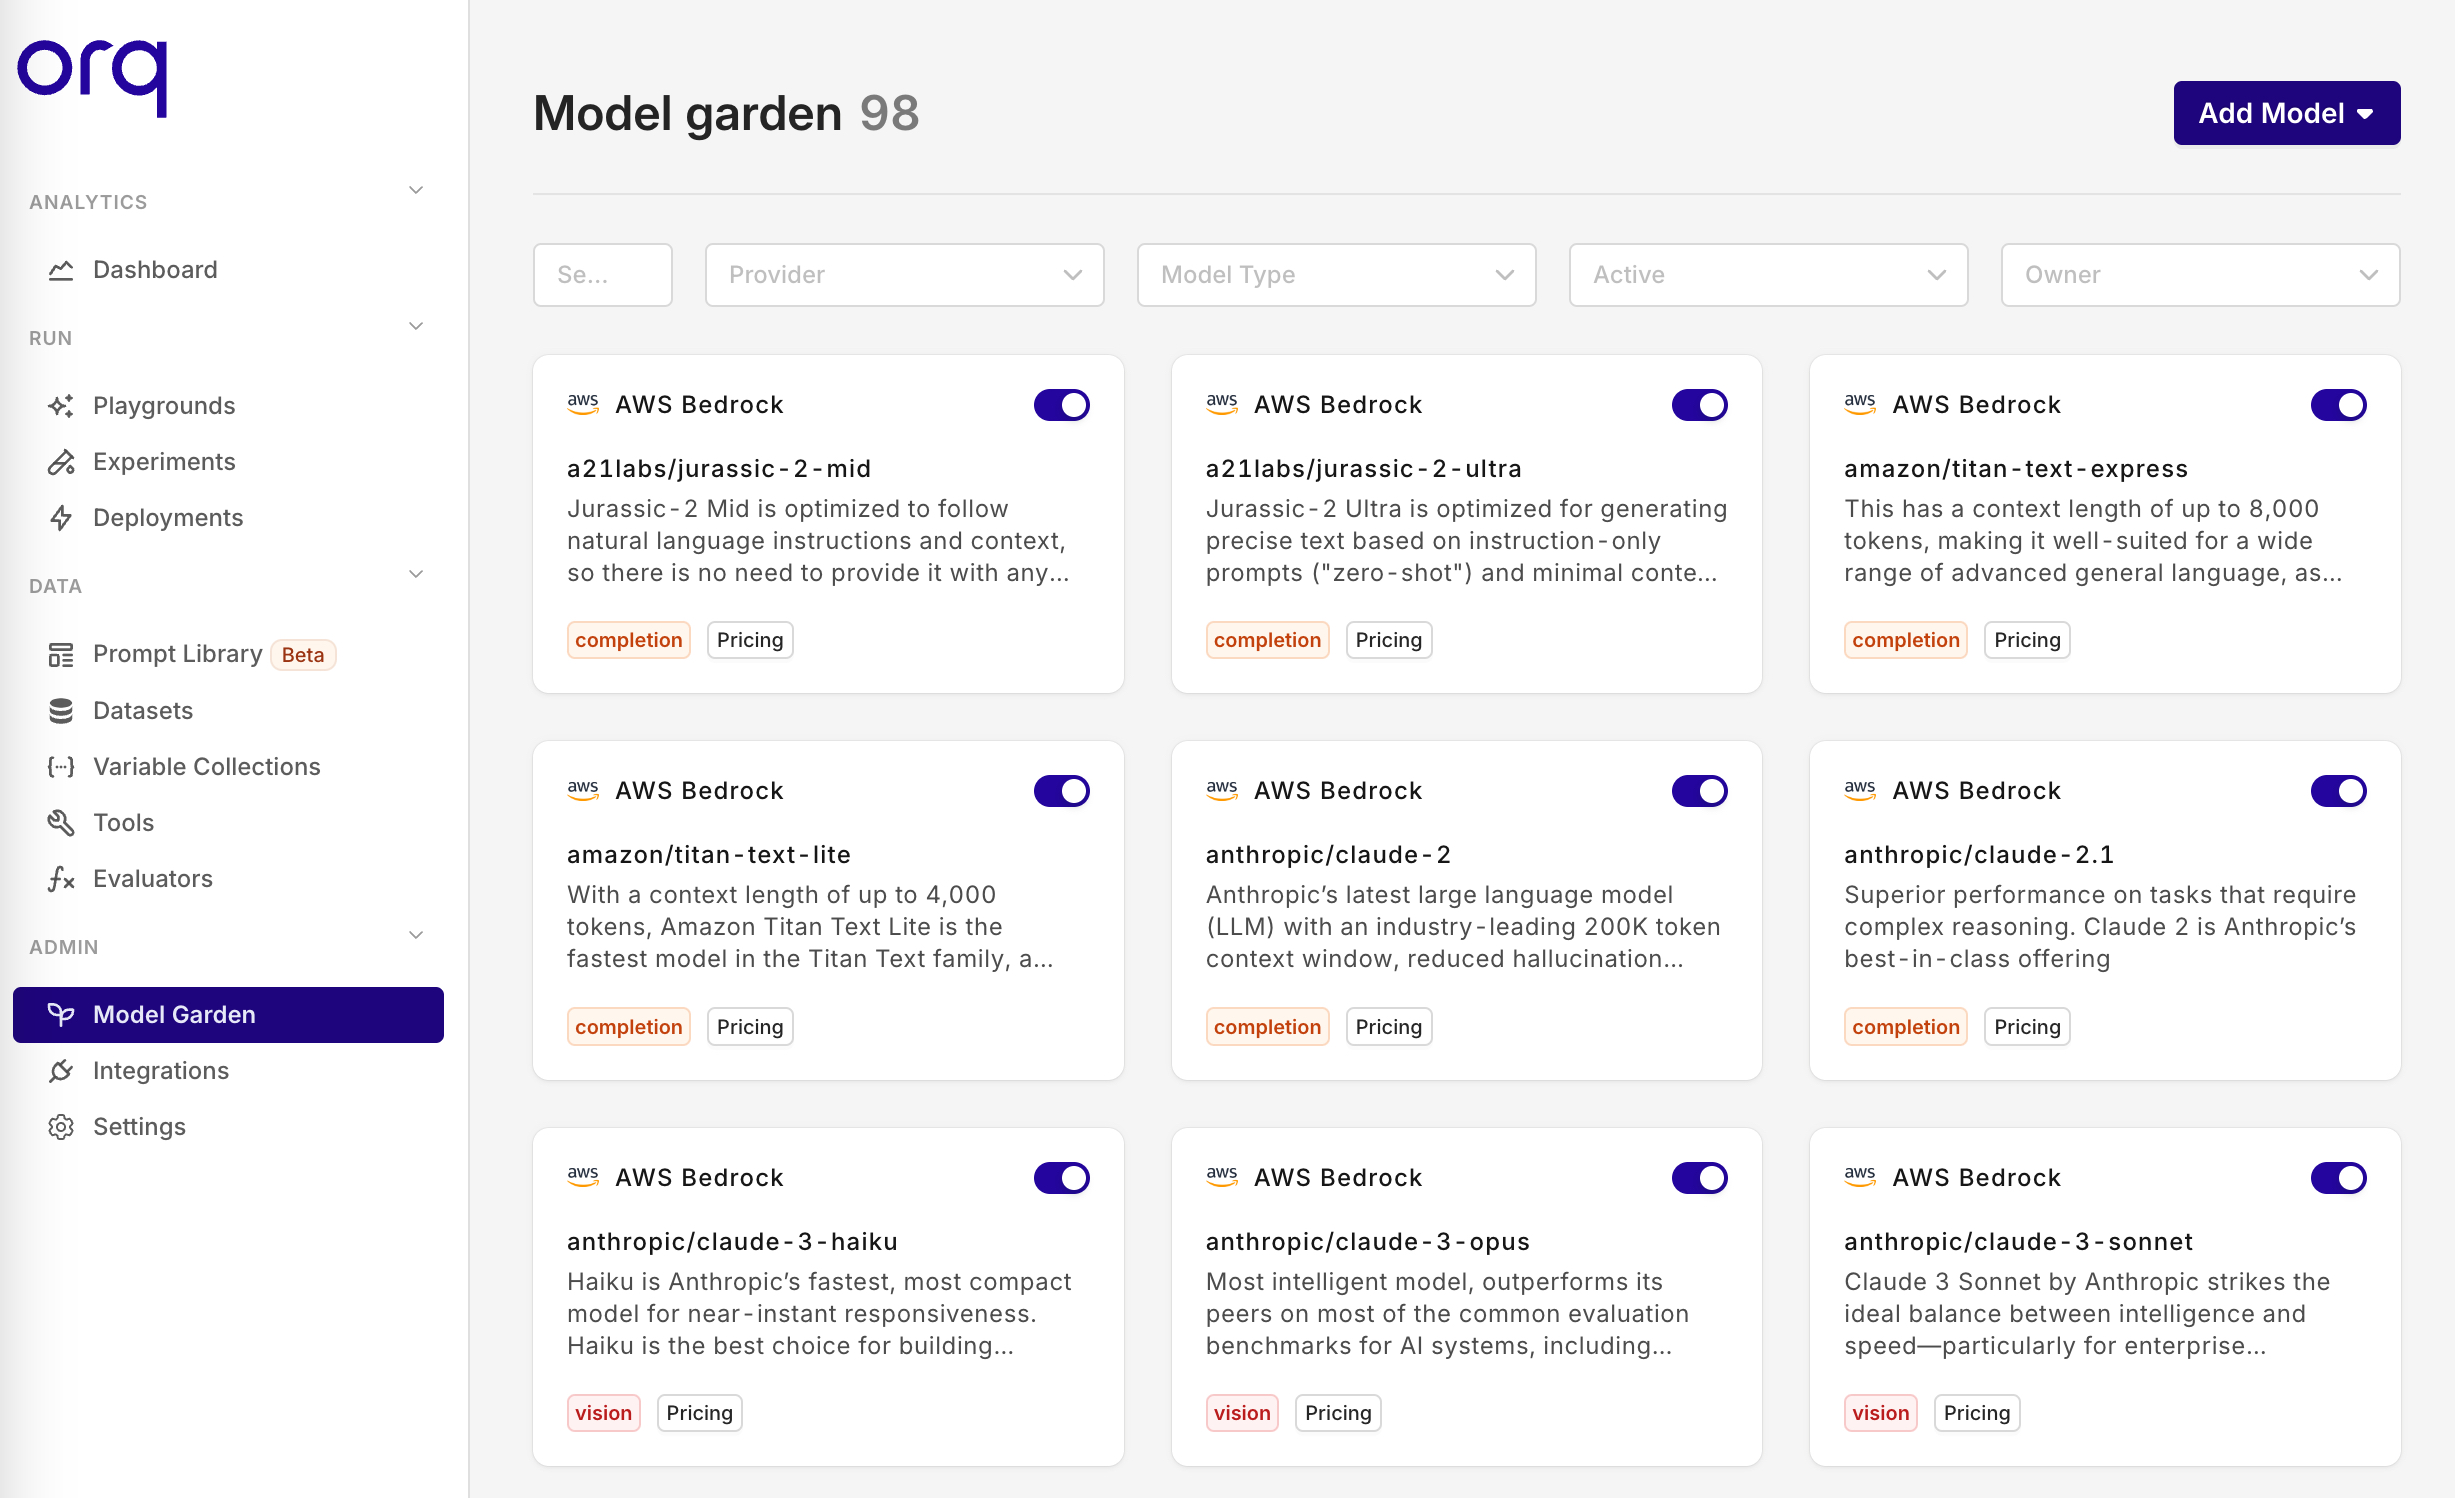 **orq.ai** lets you use a wide variety of models to fit your business needs.